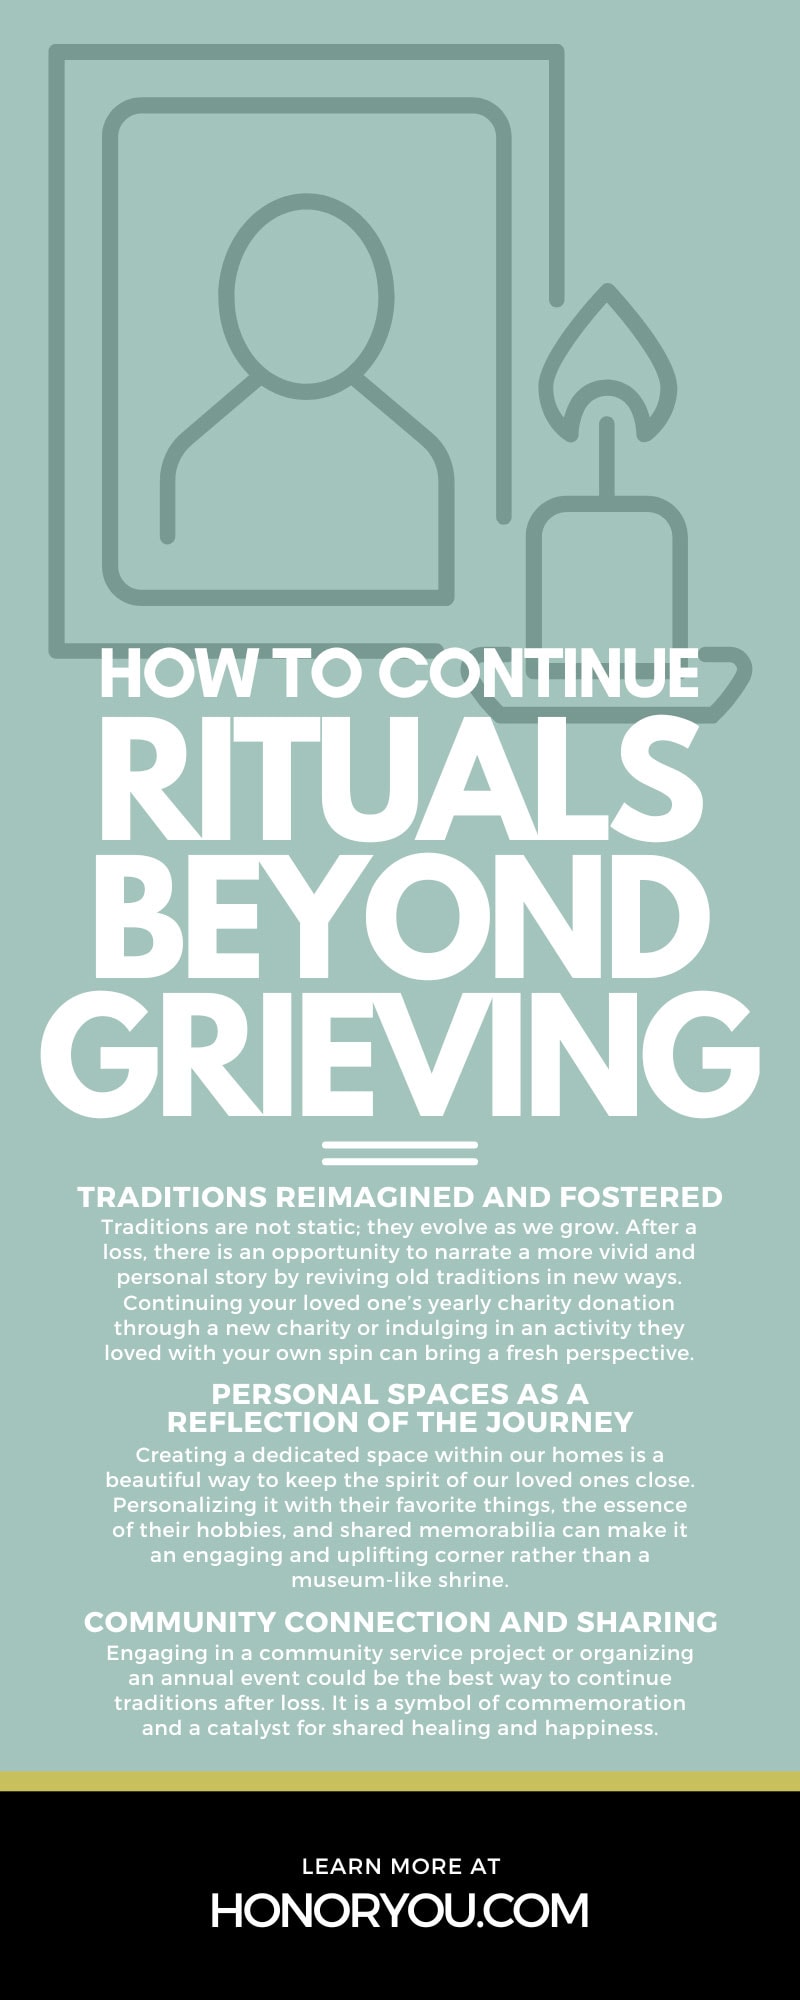 How To Continue Rituals Beyond Grieving